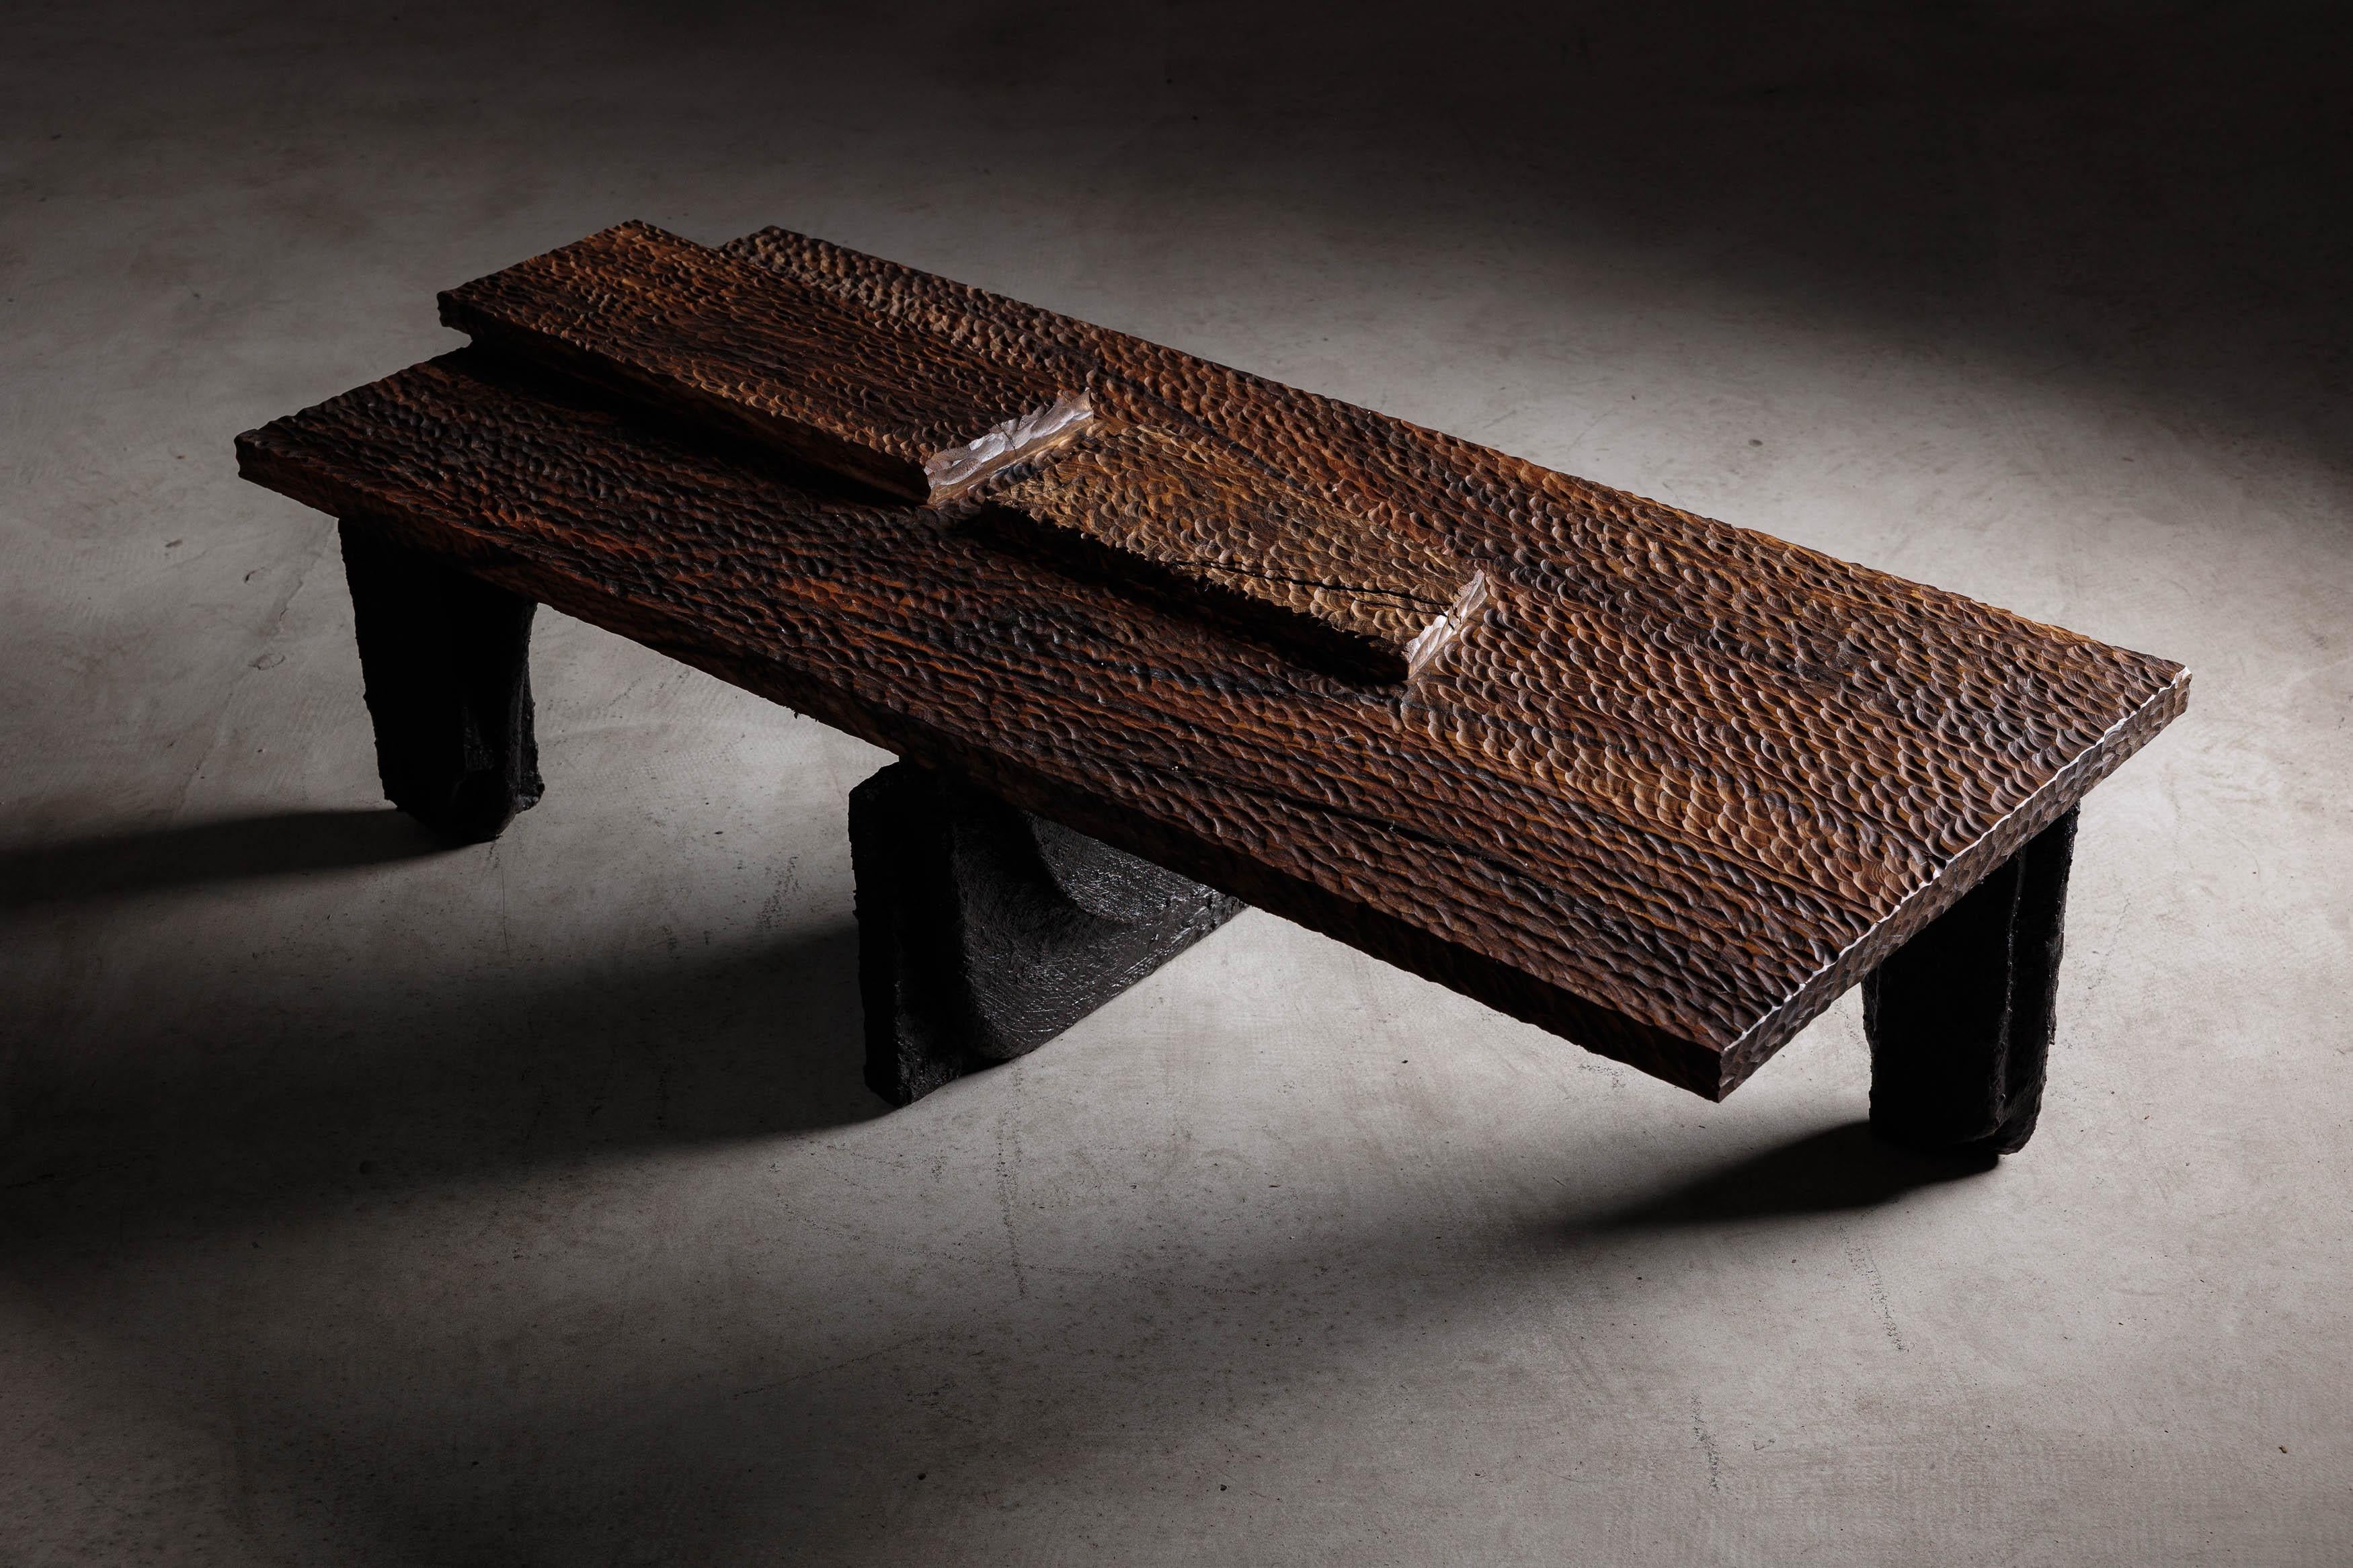 Introducing our stunning hand-carved walnut coffee table from Eero Moss Studio. Meticulously crafted with expert skill and precision, this table is a true work of art that will elevate any living space.

With its rich, warm tones and intricate